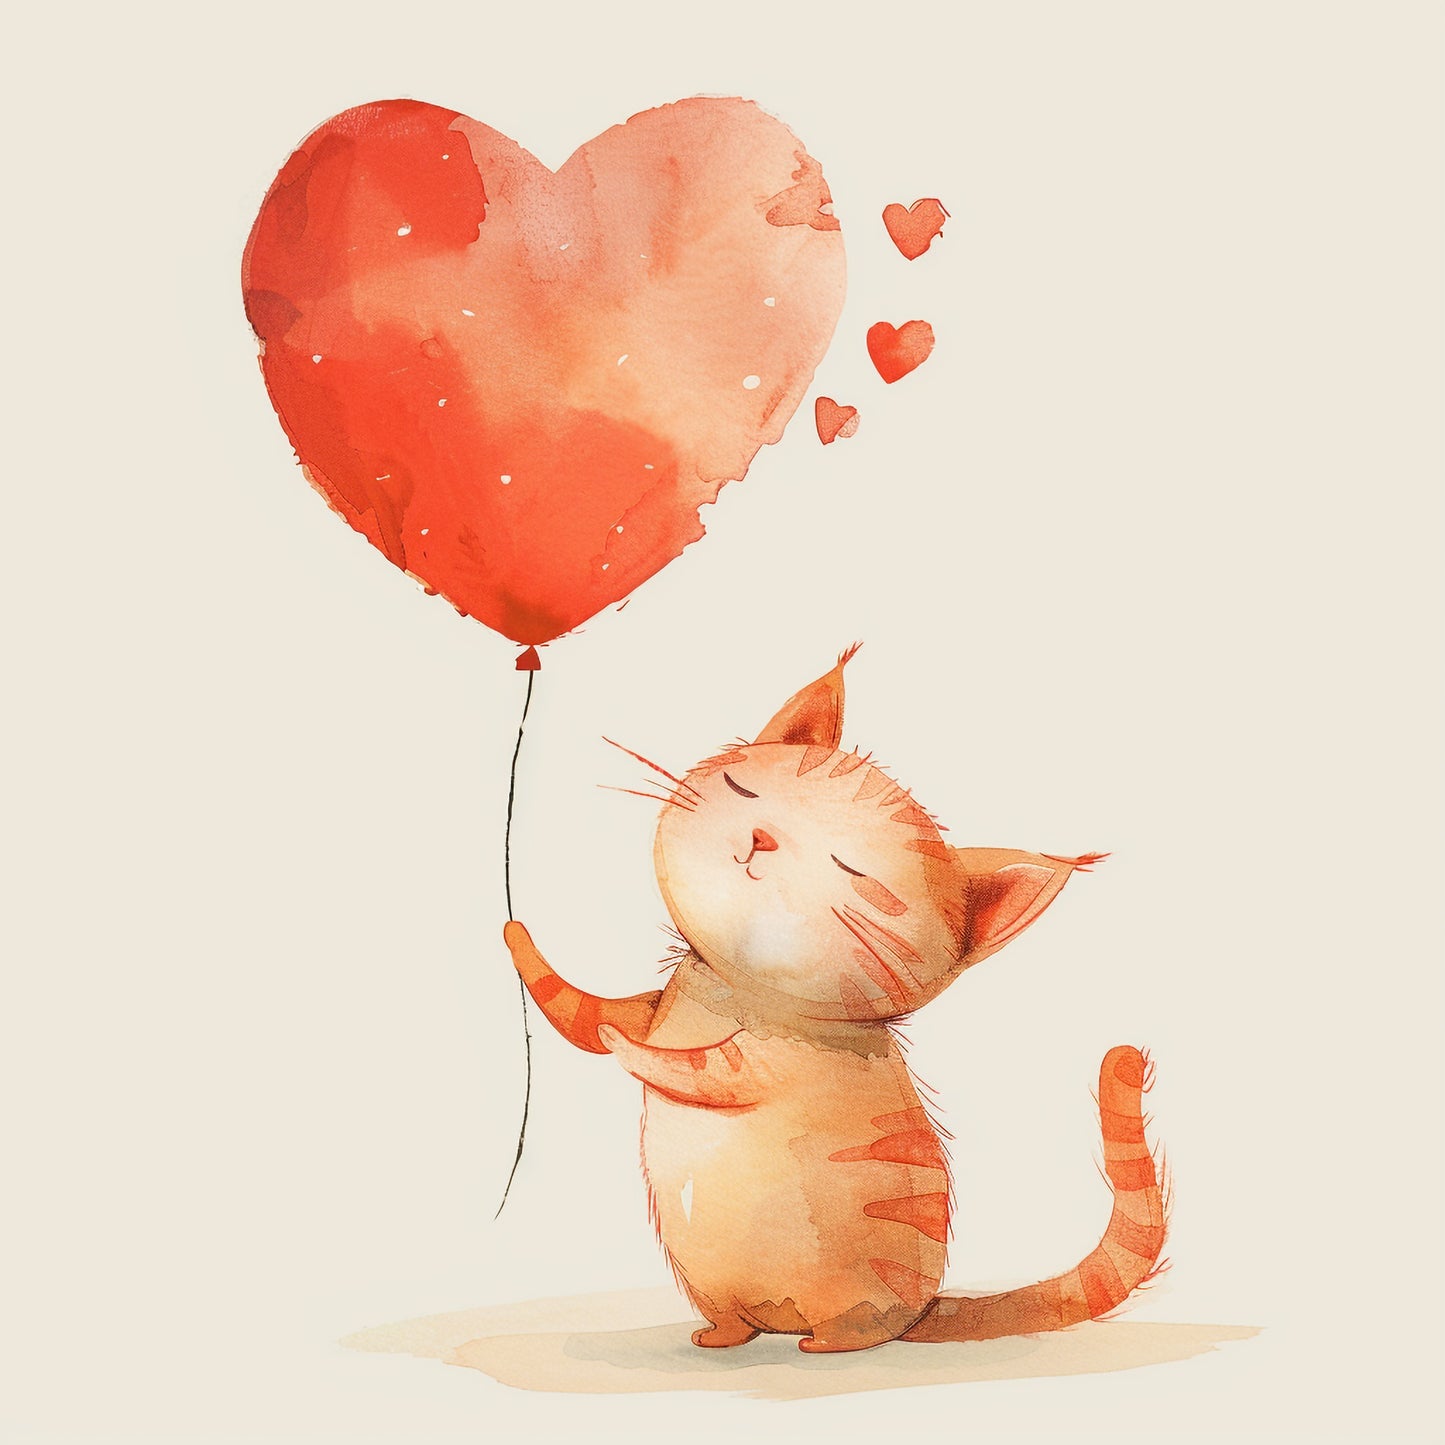 Cute Cat with a Heart-Shaped Balloon Illustration